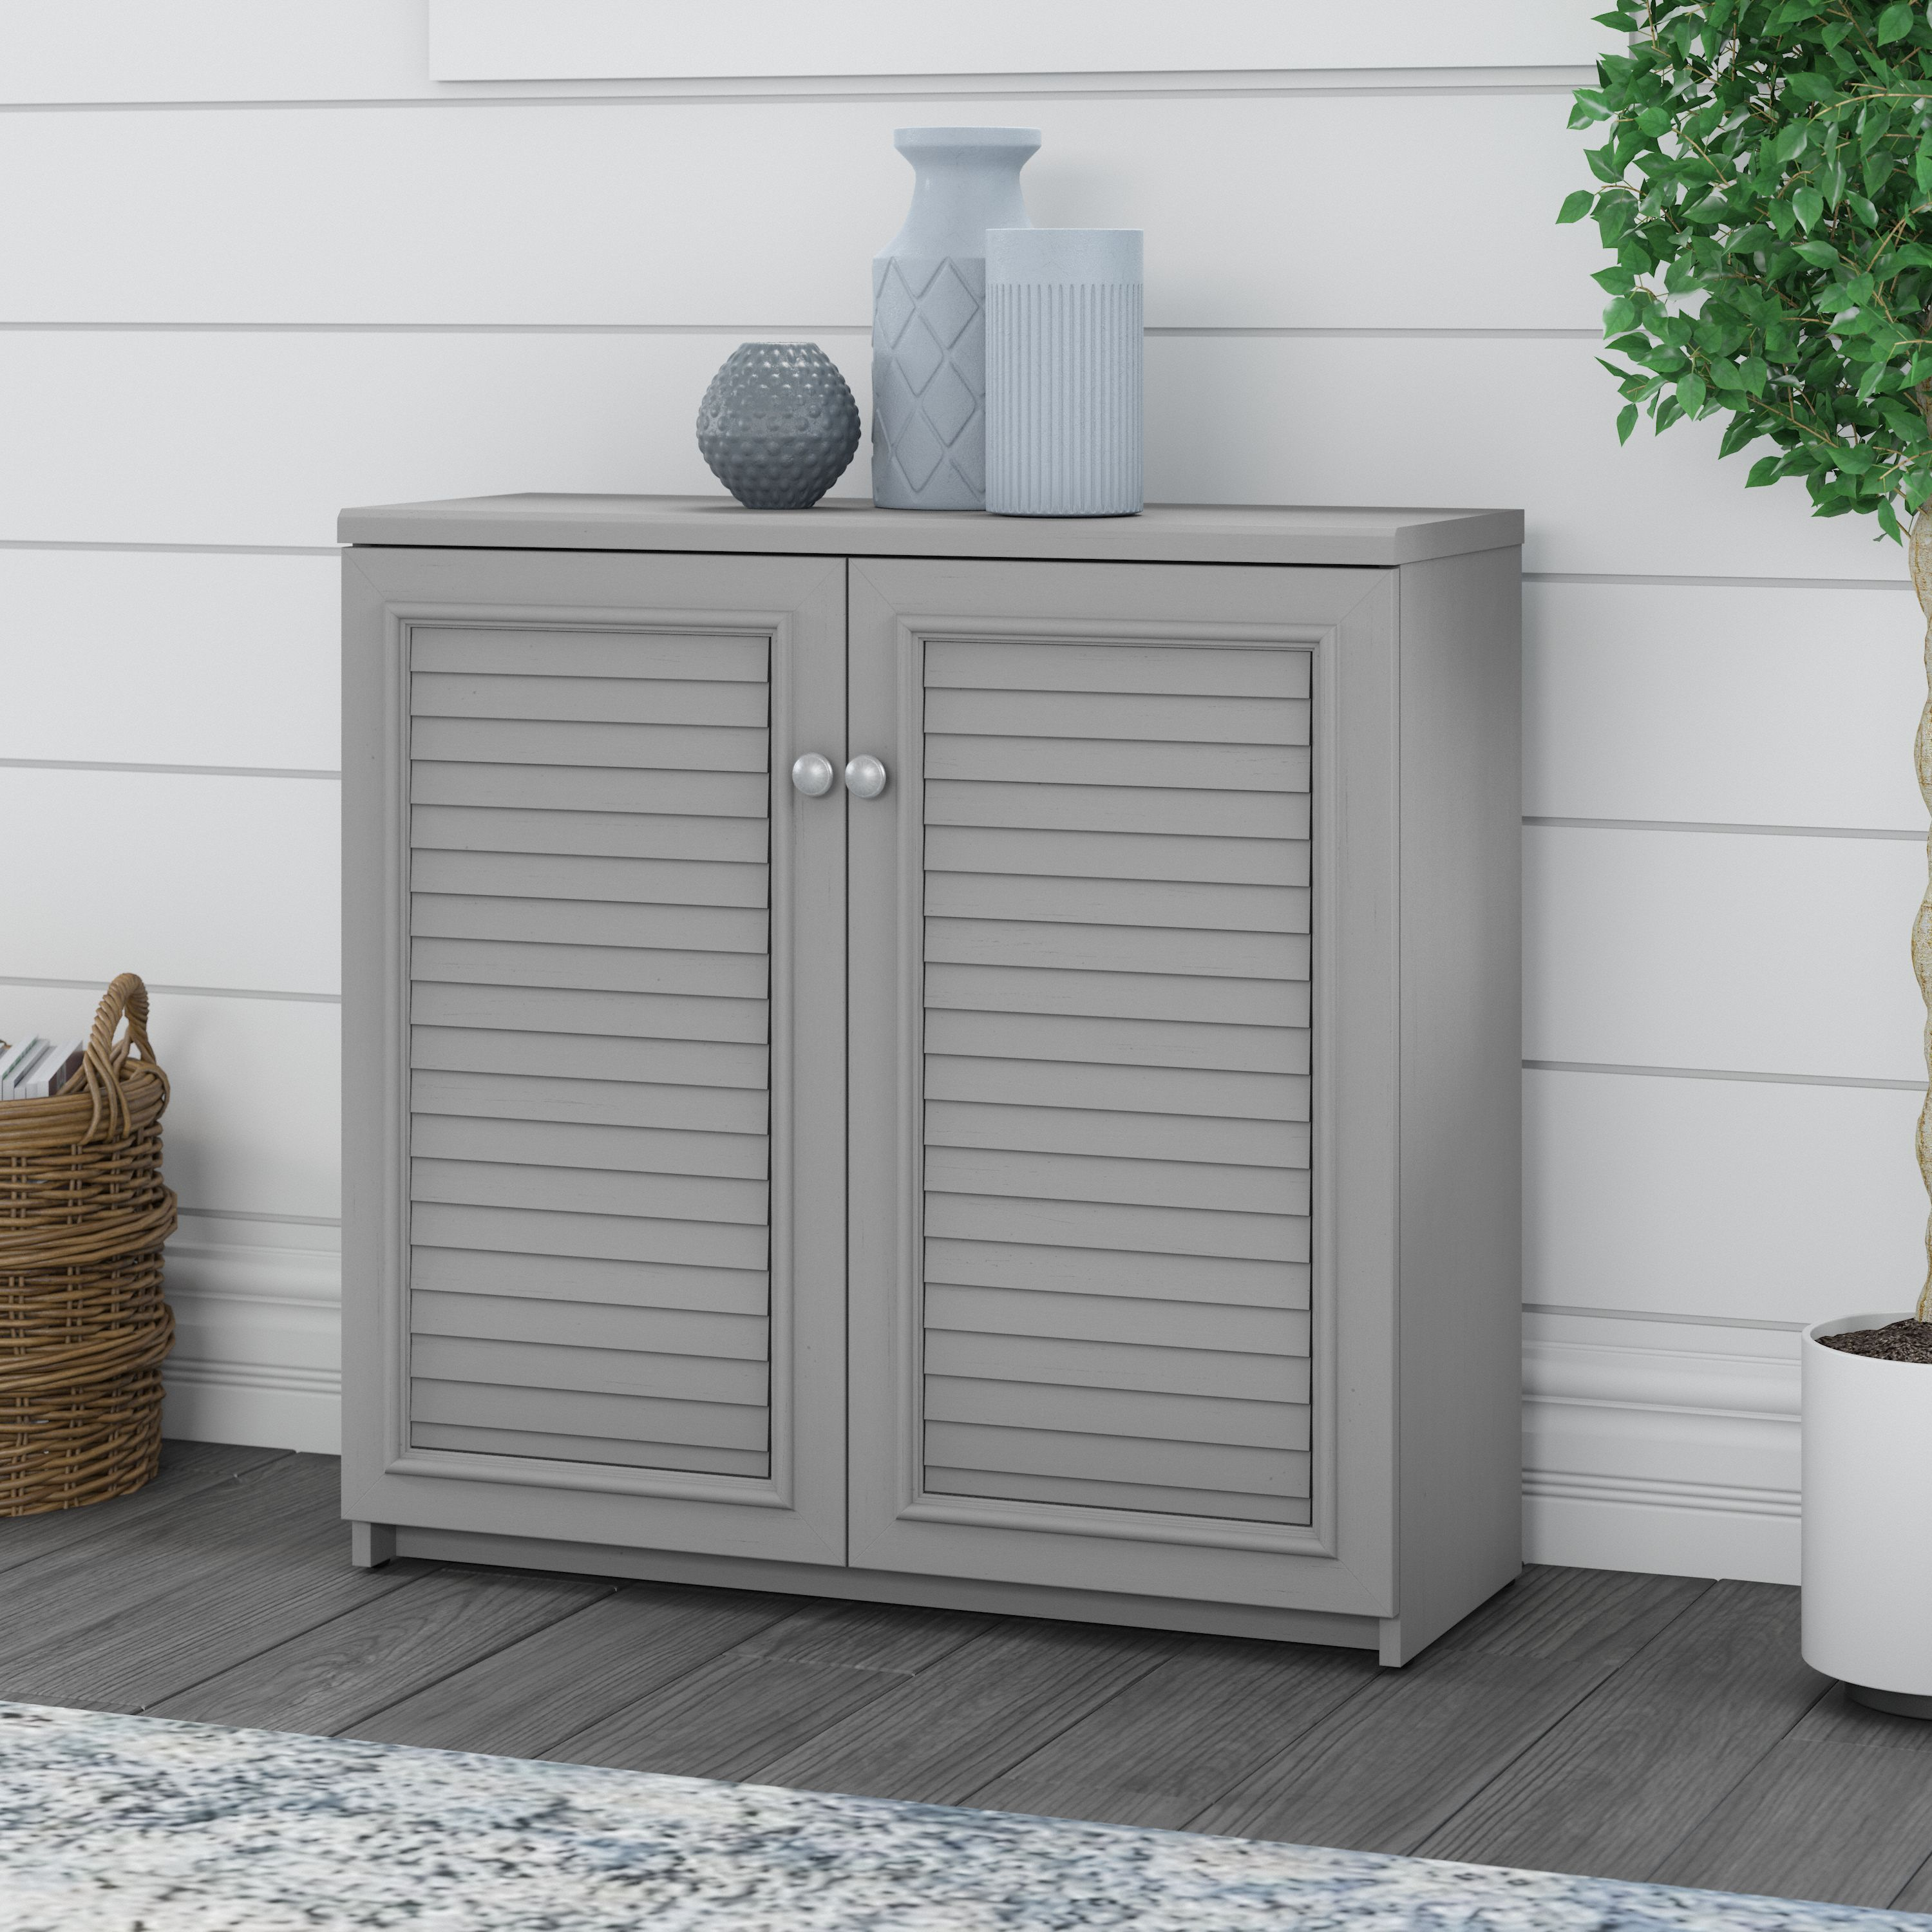 Shop Bush Furniture Fairview Small Storage Cabinet with Doors and Shelves 01 WC53596-03 #color_cape cod gray